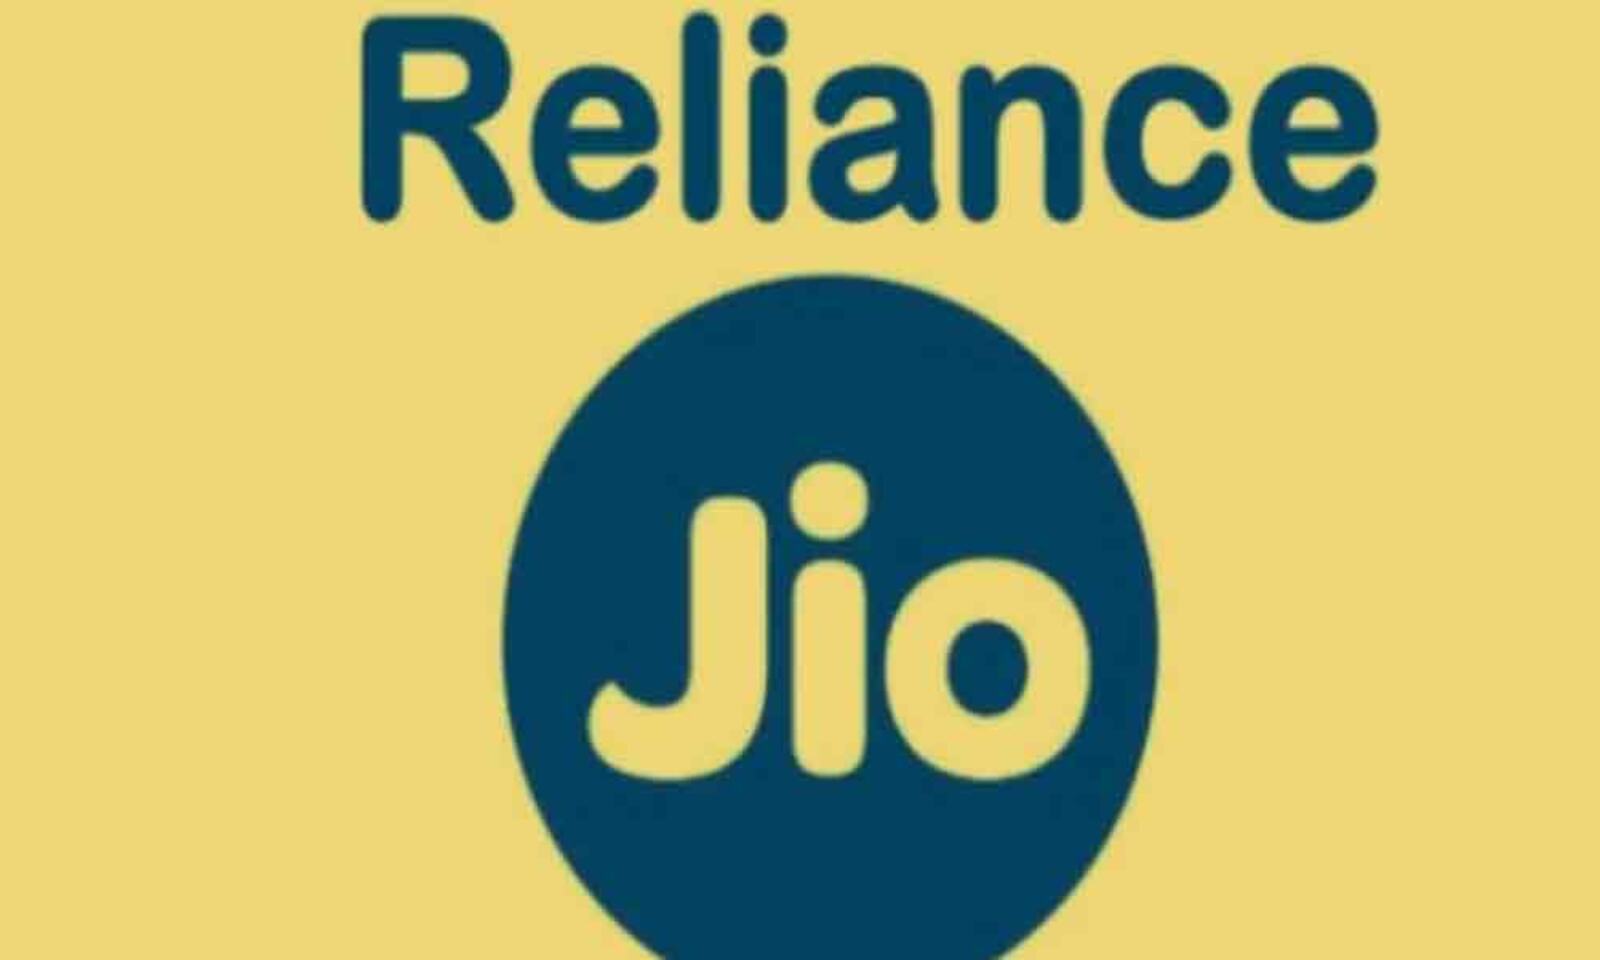 Reliance Jio 4G SIM available to almost everyone now, Airtel & Idea  slash data prices - India Today